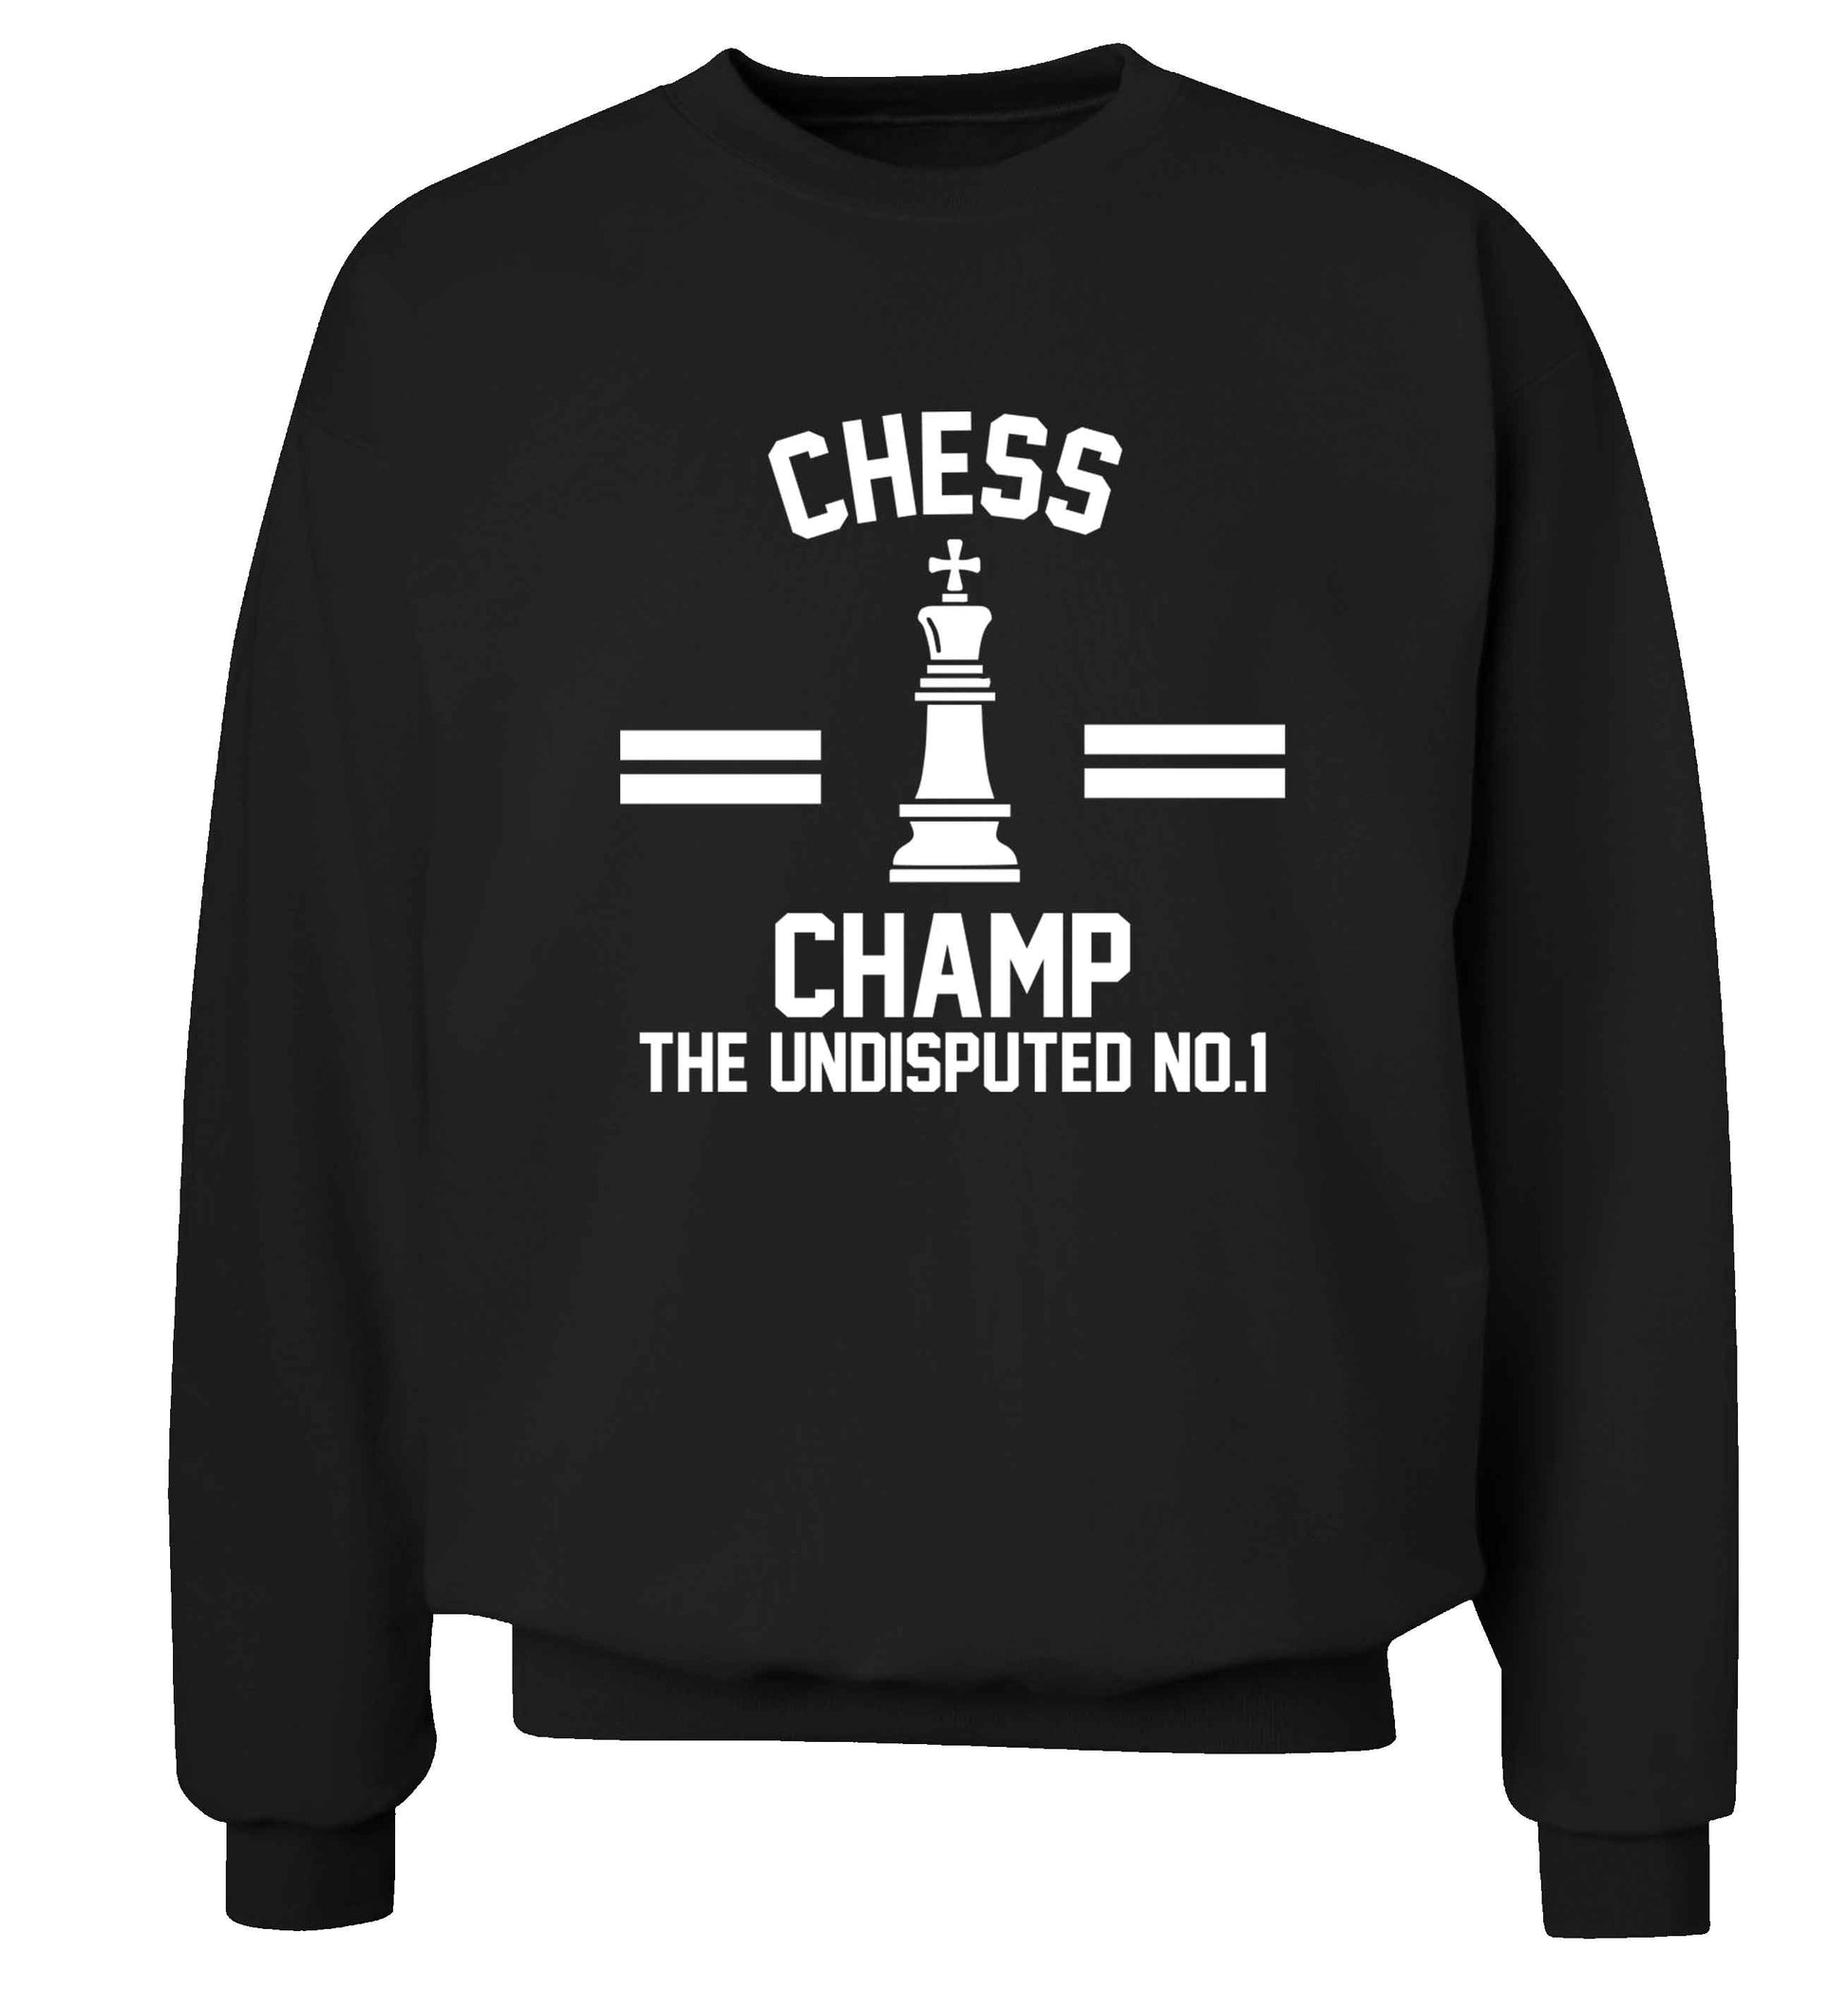 Undisputed chess championship no.1  Adult's unisex black Sweater 2XL